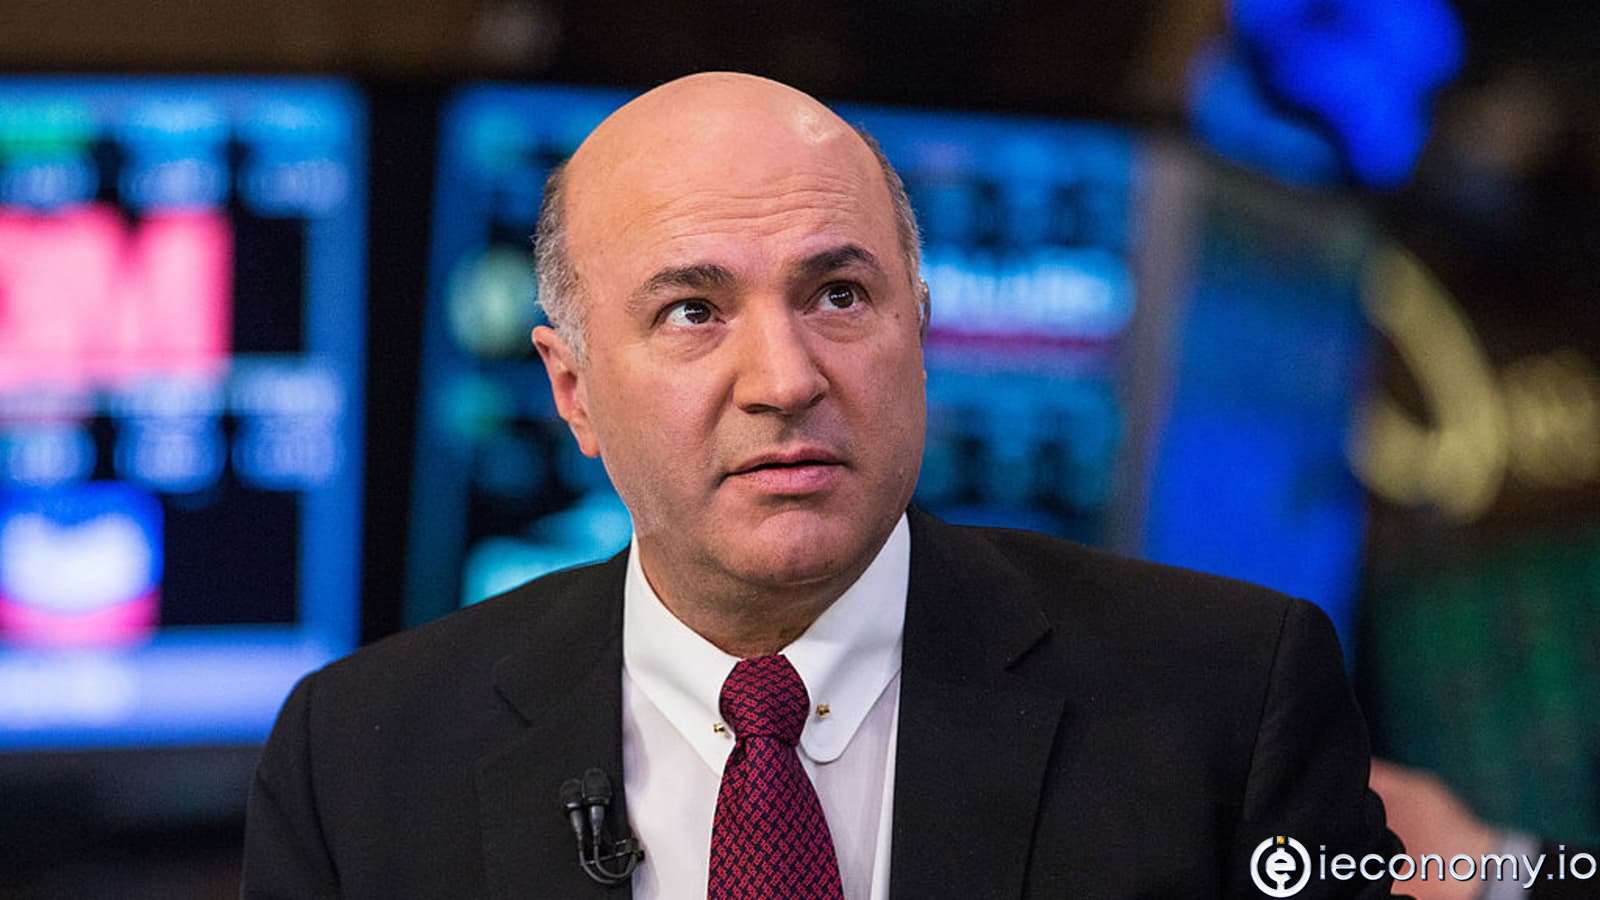 Kevin O'Leary: ''If This Happens, It Will Push Bitcoin to $60,000 in 2 Weeks''